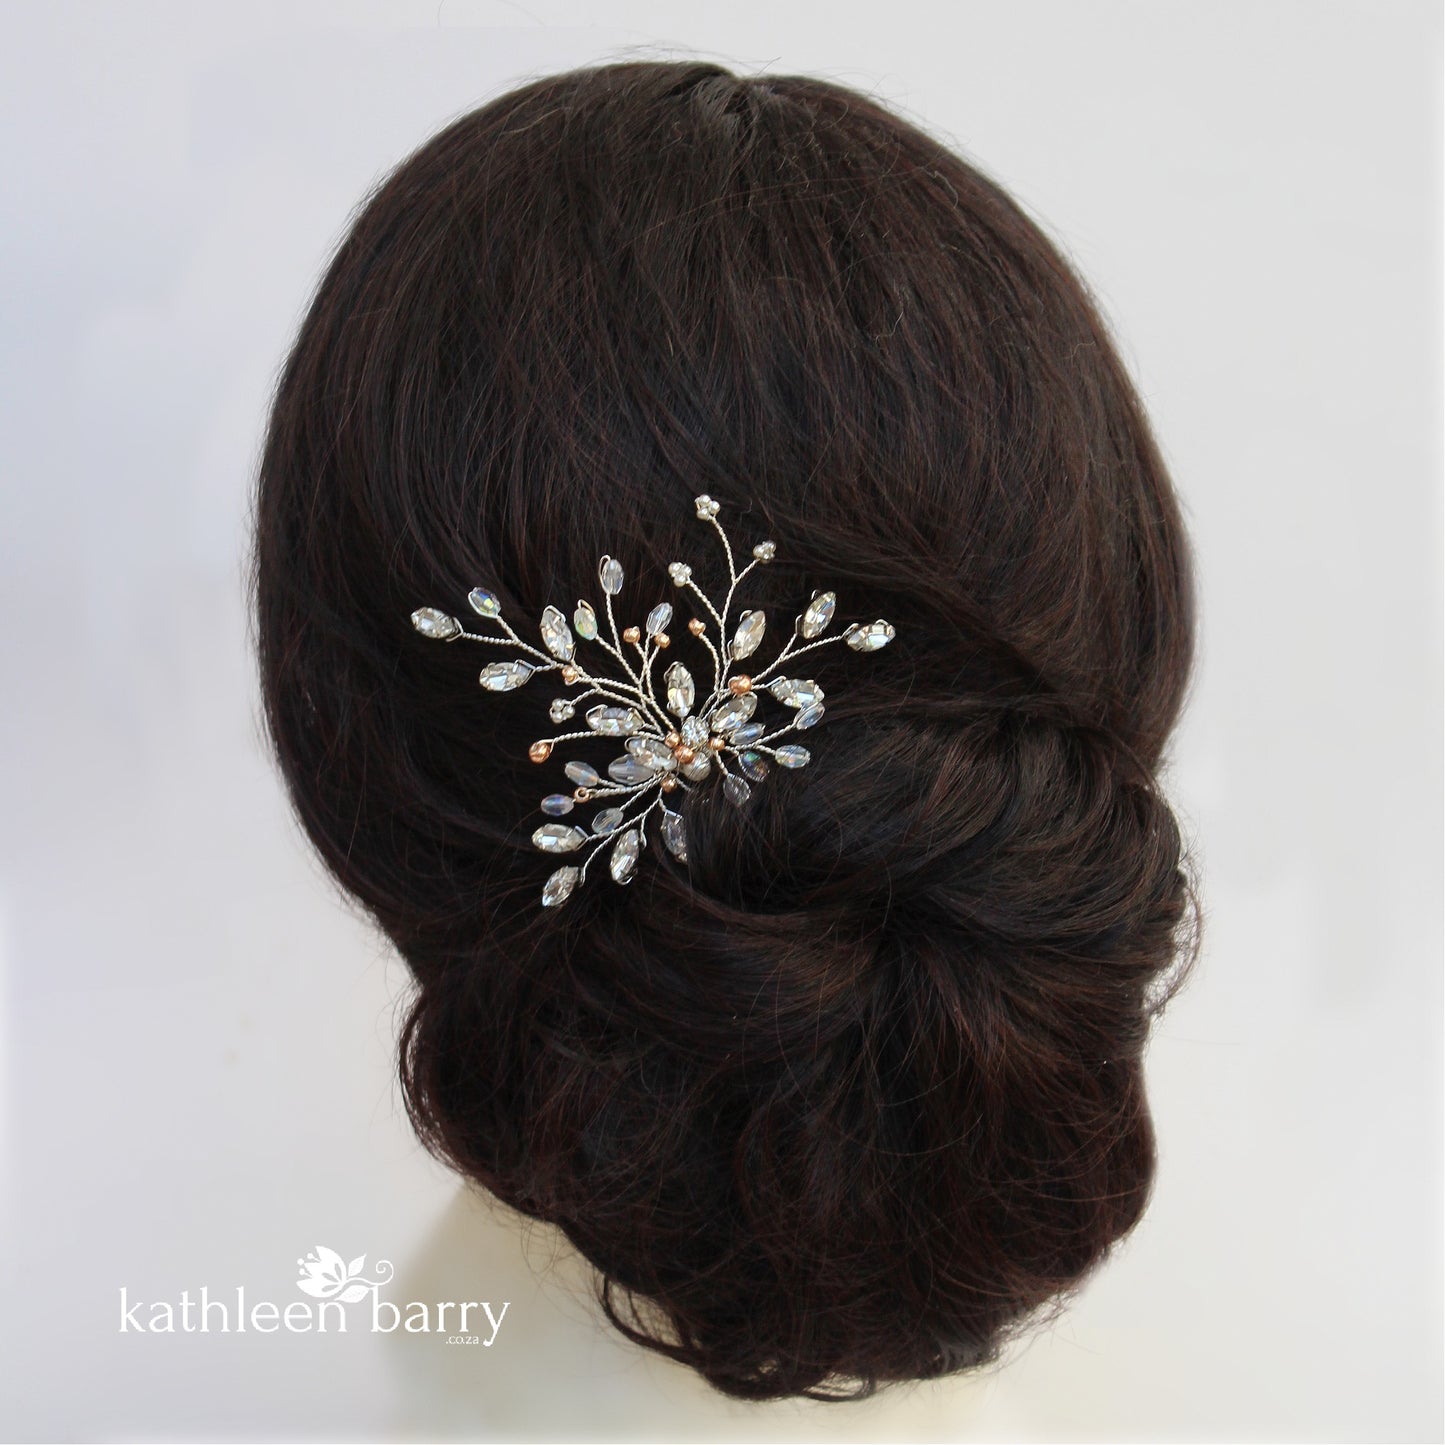 Bridal hair pin rhinestone leaf leaves rose gold and other color options available